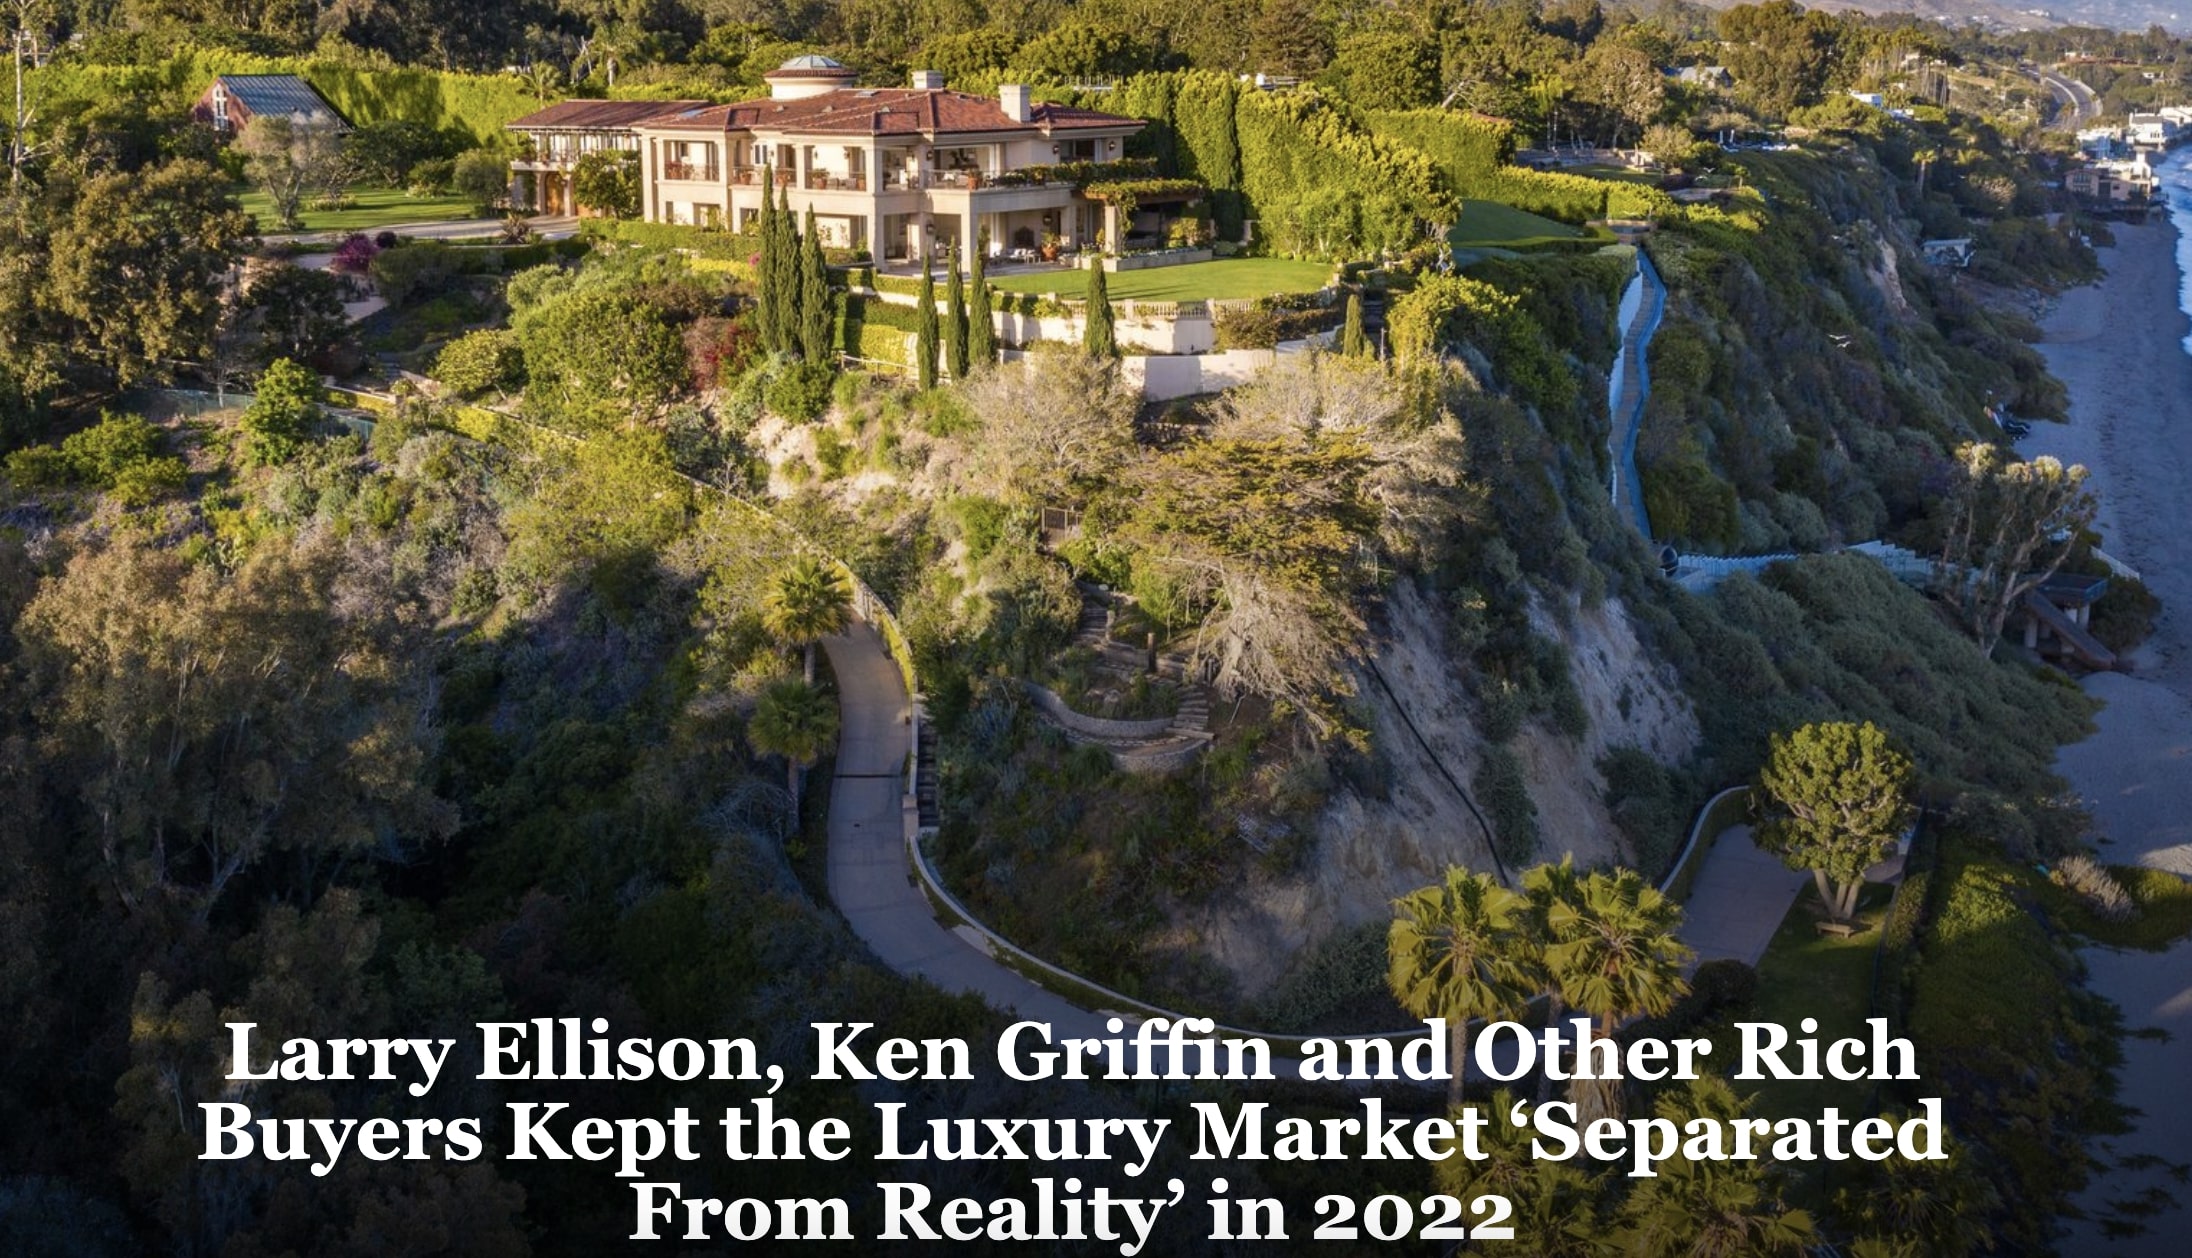 Larry Ellison, Ken Griffin and Other Rich Buyers Kept the Luxury Market ‘Separated From Reality’ in 2022